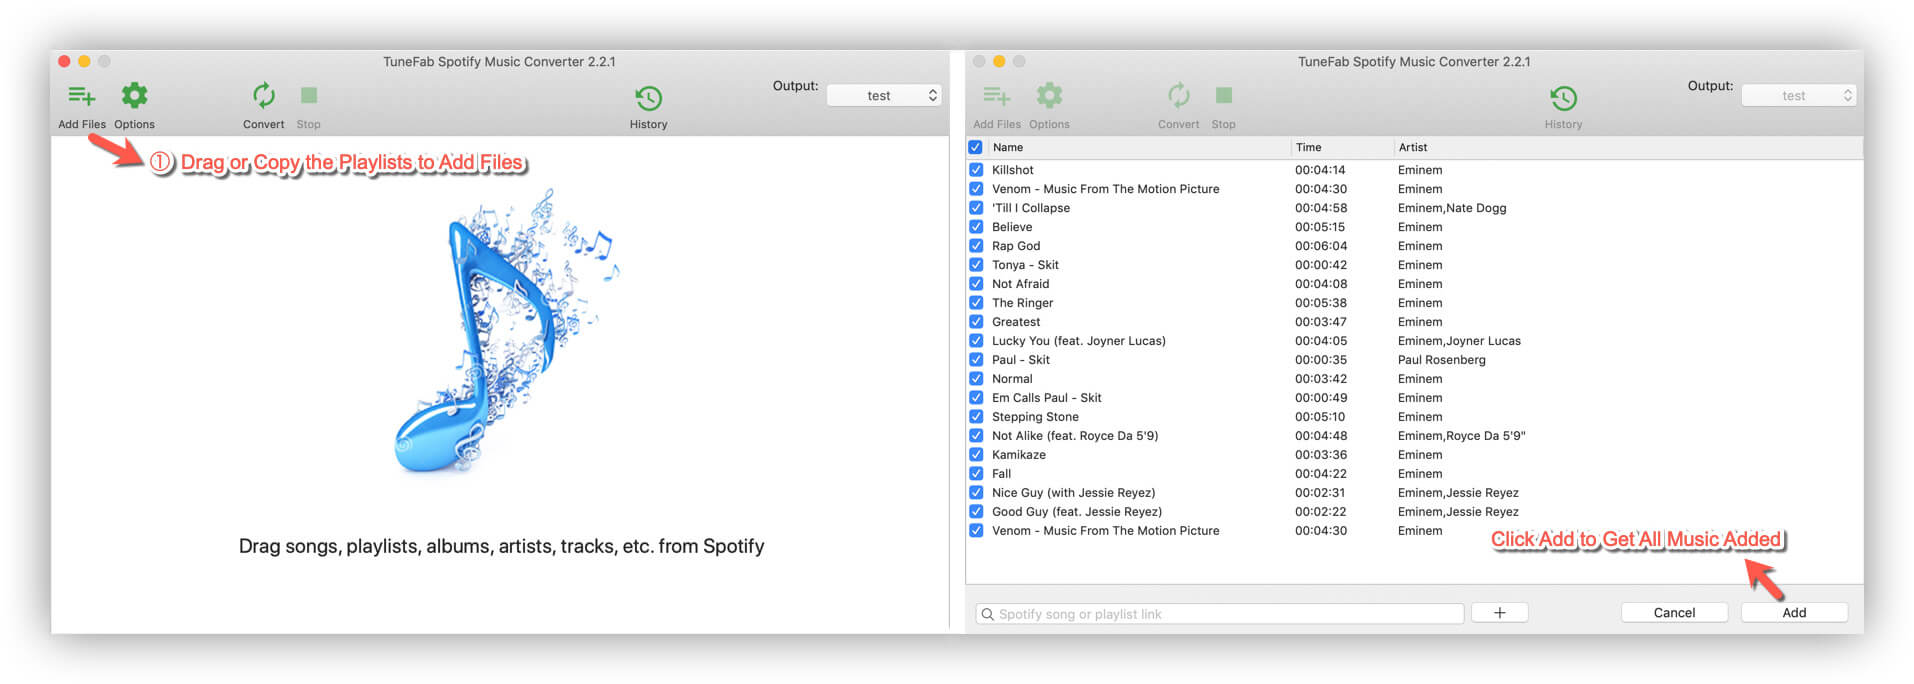 Spotify local file waiting to download free